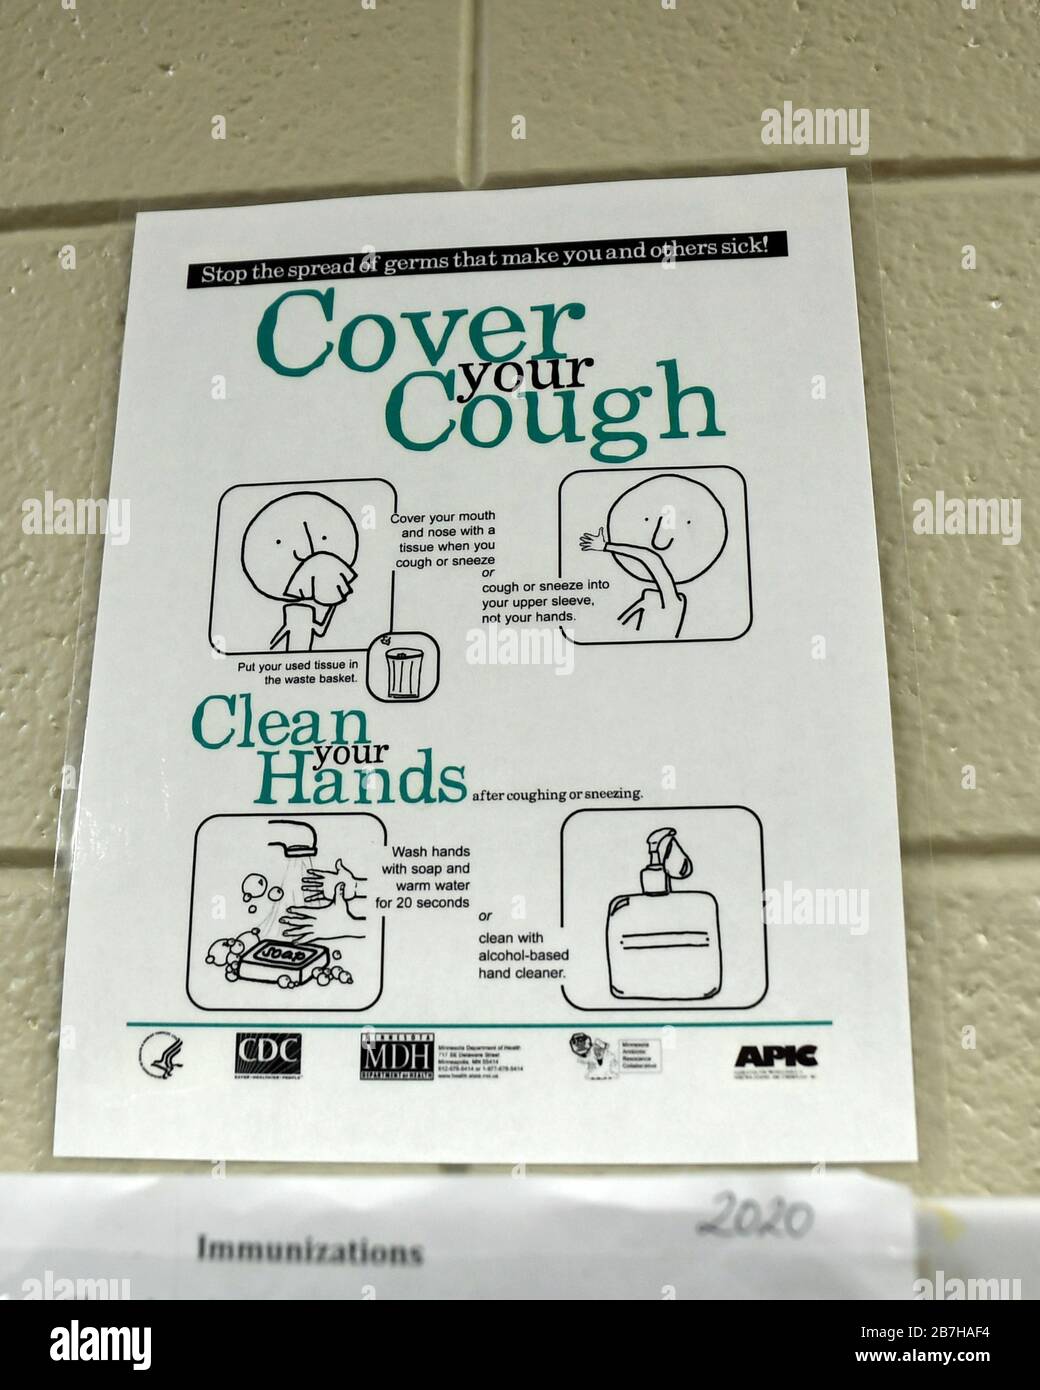 Germ prevention sign depicting proper etiquette to prevent the spread of Coronavirus located in the 145th Medical Group on Mar. 06, 2020 at the North Carolina (N.C.) Air National Guard Base, Charlotte Douglas International Airport, March 8, 2020. The Coronavirus, or COVID19, is spreading across the U.S. several states, including North Carolina, have reported their first cases. Both Wake and Chatham Counties in N.C. have 2 confirmed cases of the virus. () Stock Photo